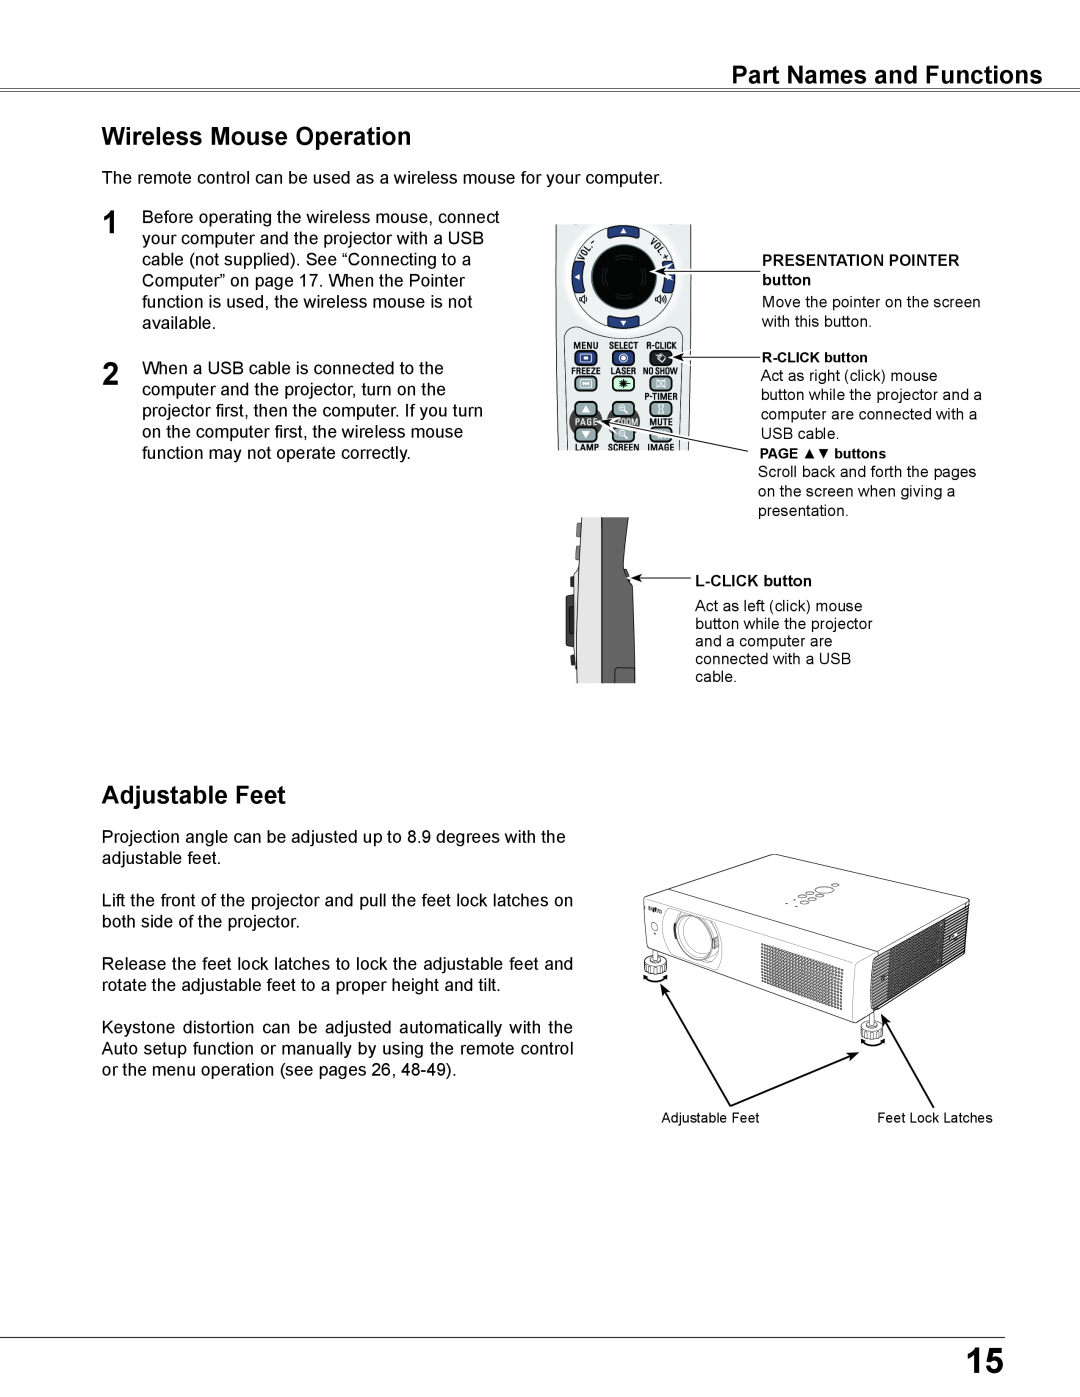 Sanyo WXU700A owner manual Part Names and Functions Wireless Mouse Operation, Adjustable Feet 